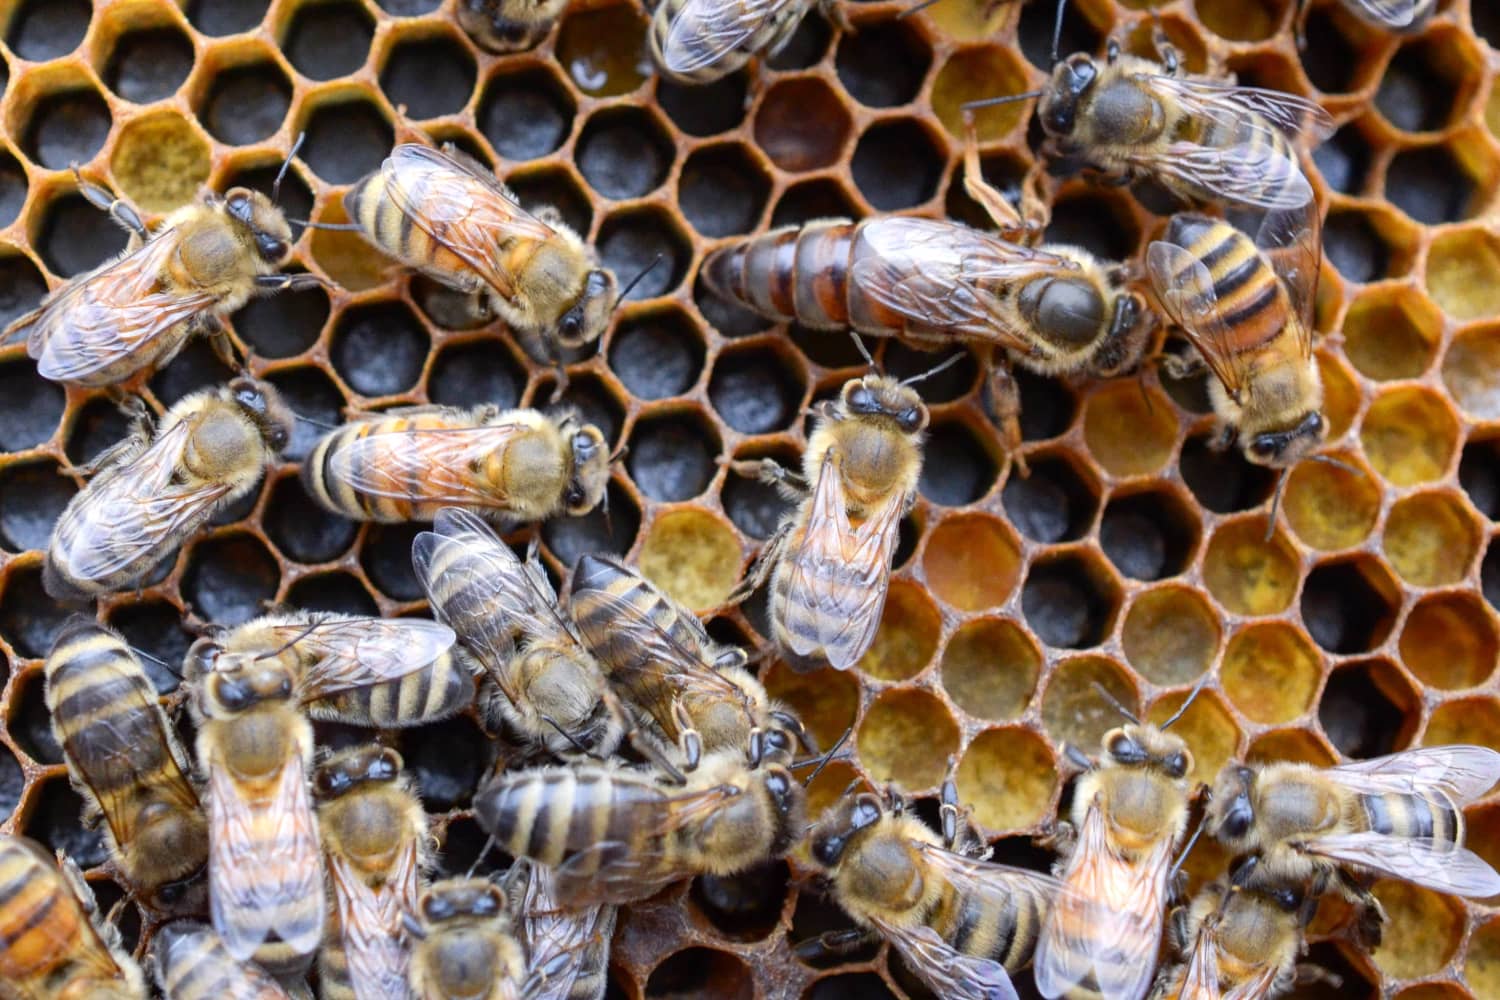 How do Honeybees Make A Honeycomb? Read the Blog To Learn More